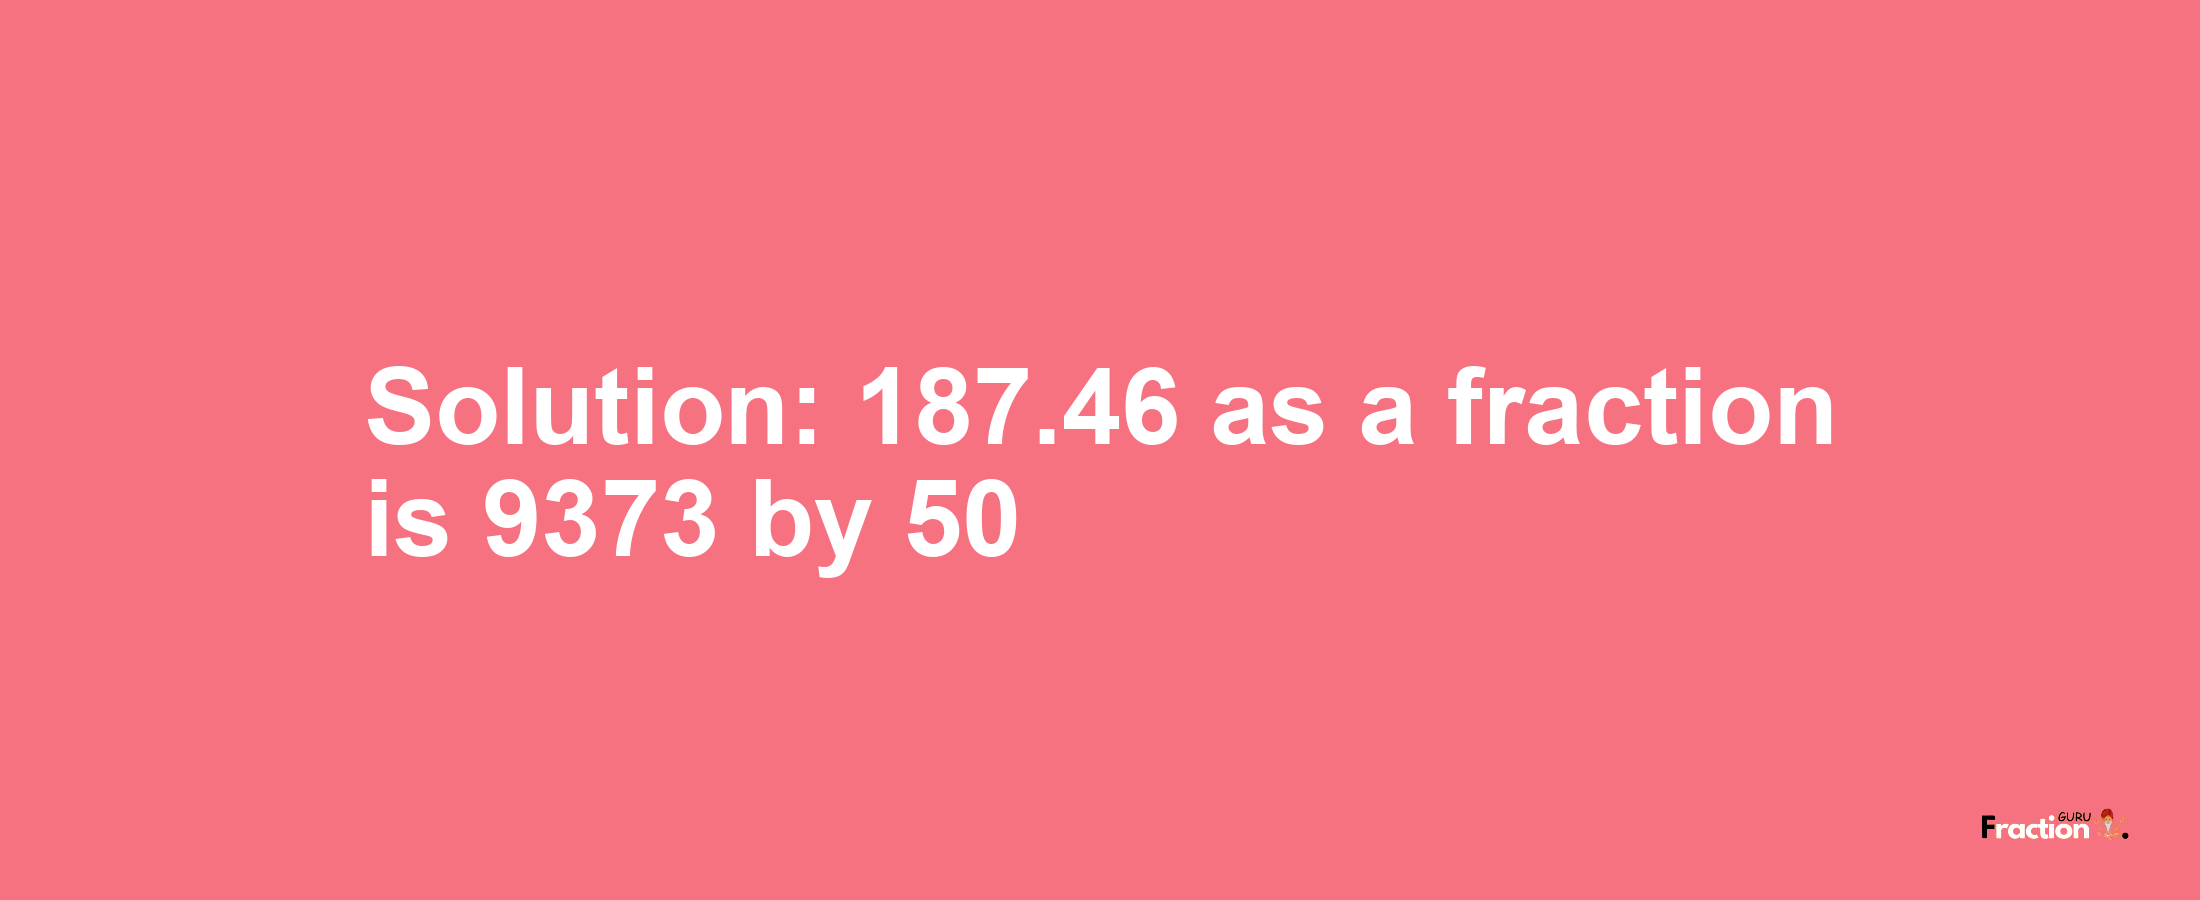 Solution:187.46 as a fraction is 9373/50